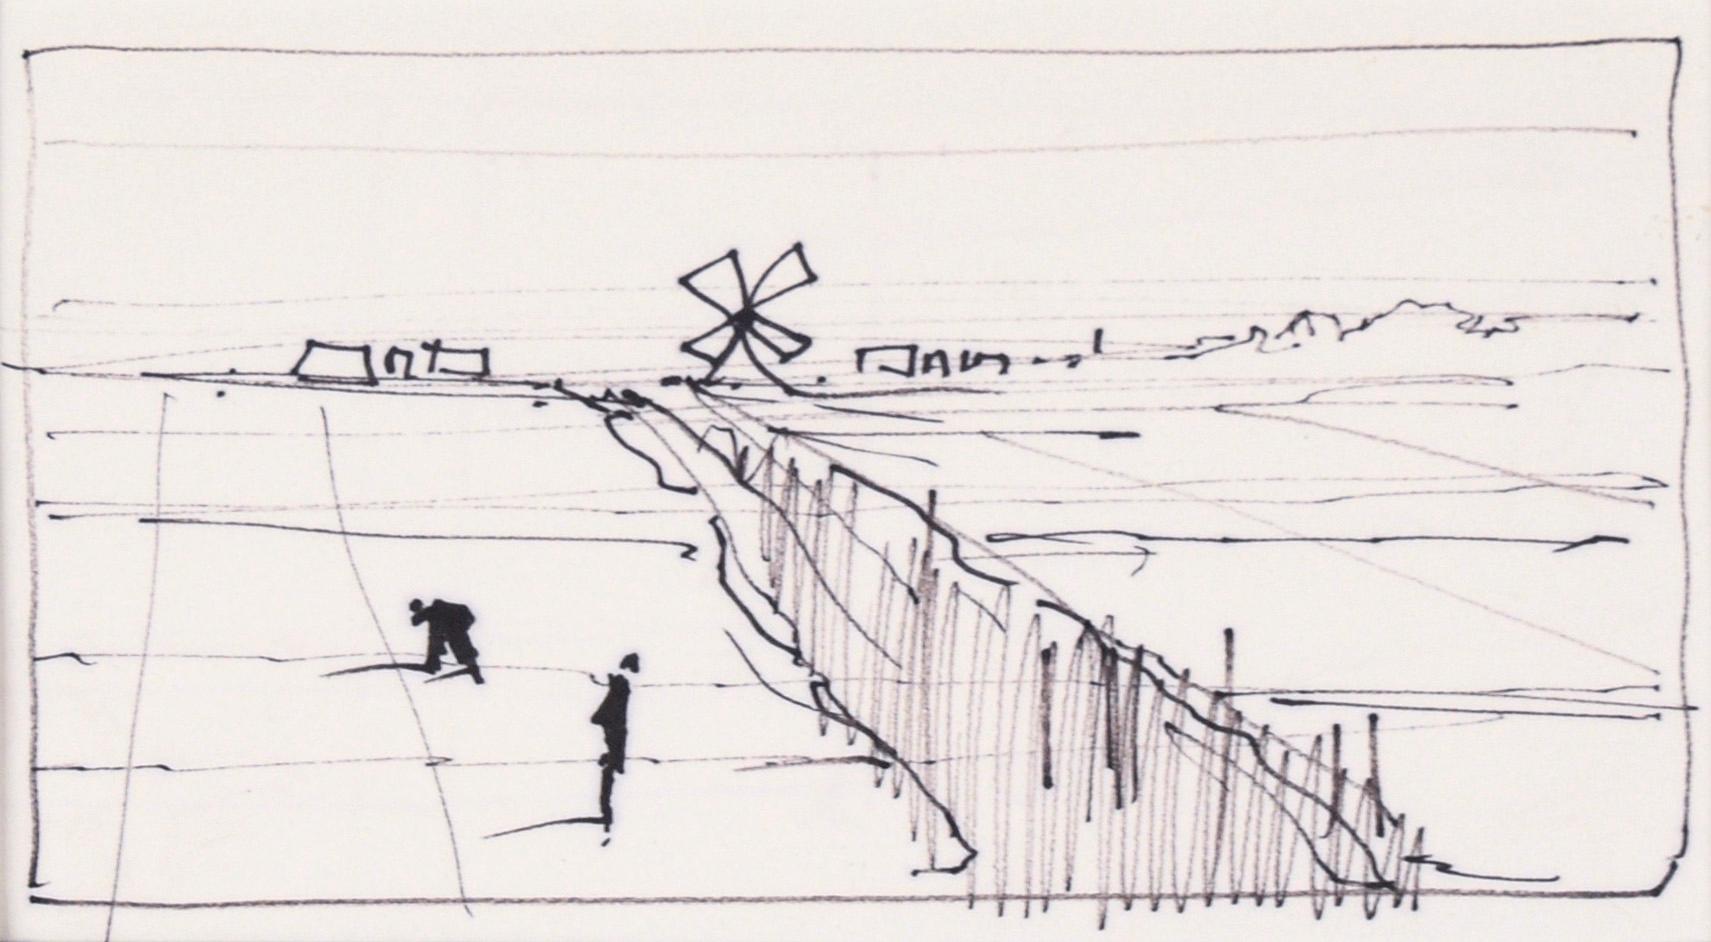 Tending the fields - Windmill - Line Drawing Landscape in Ink on Paper - Art by Laurence Sisson